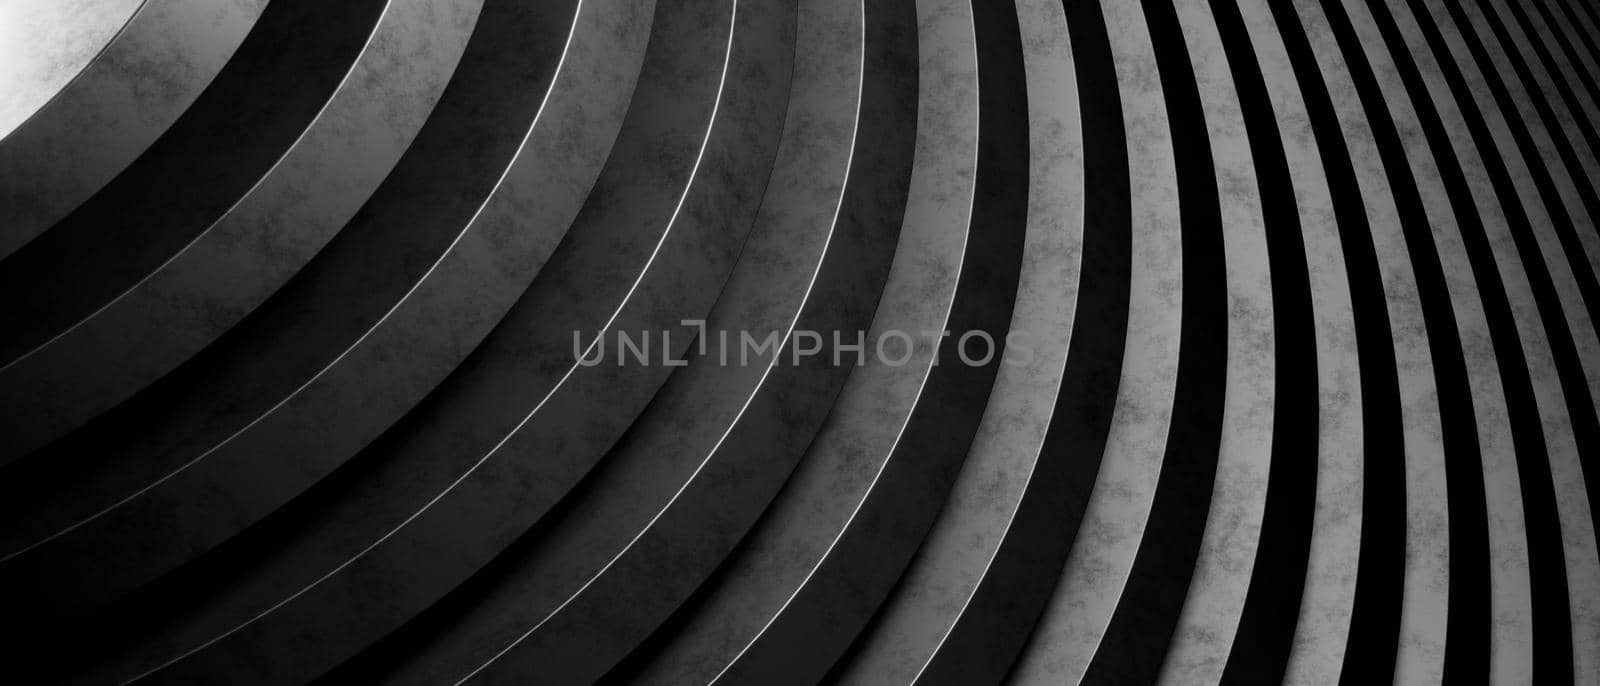 Metallic Style Abstract Minimal Wavy or Curve Lines Architecture Design Black Background, 3D Illustration